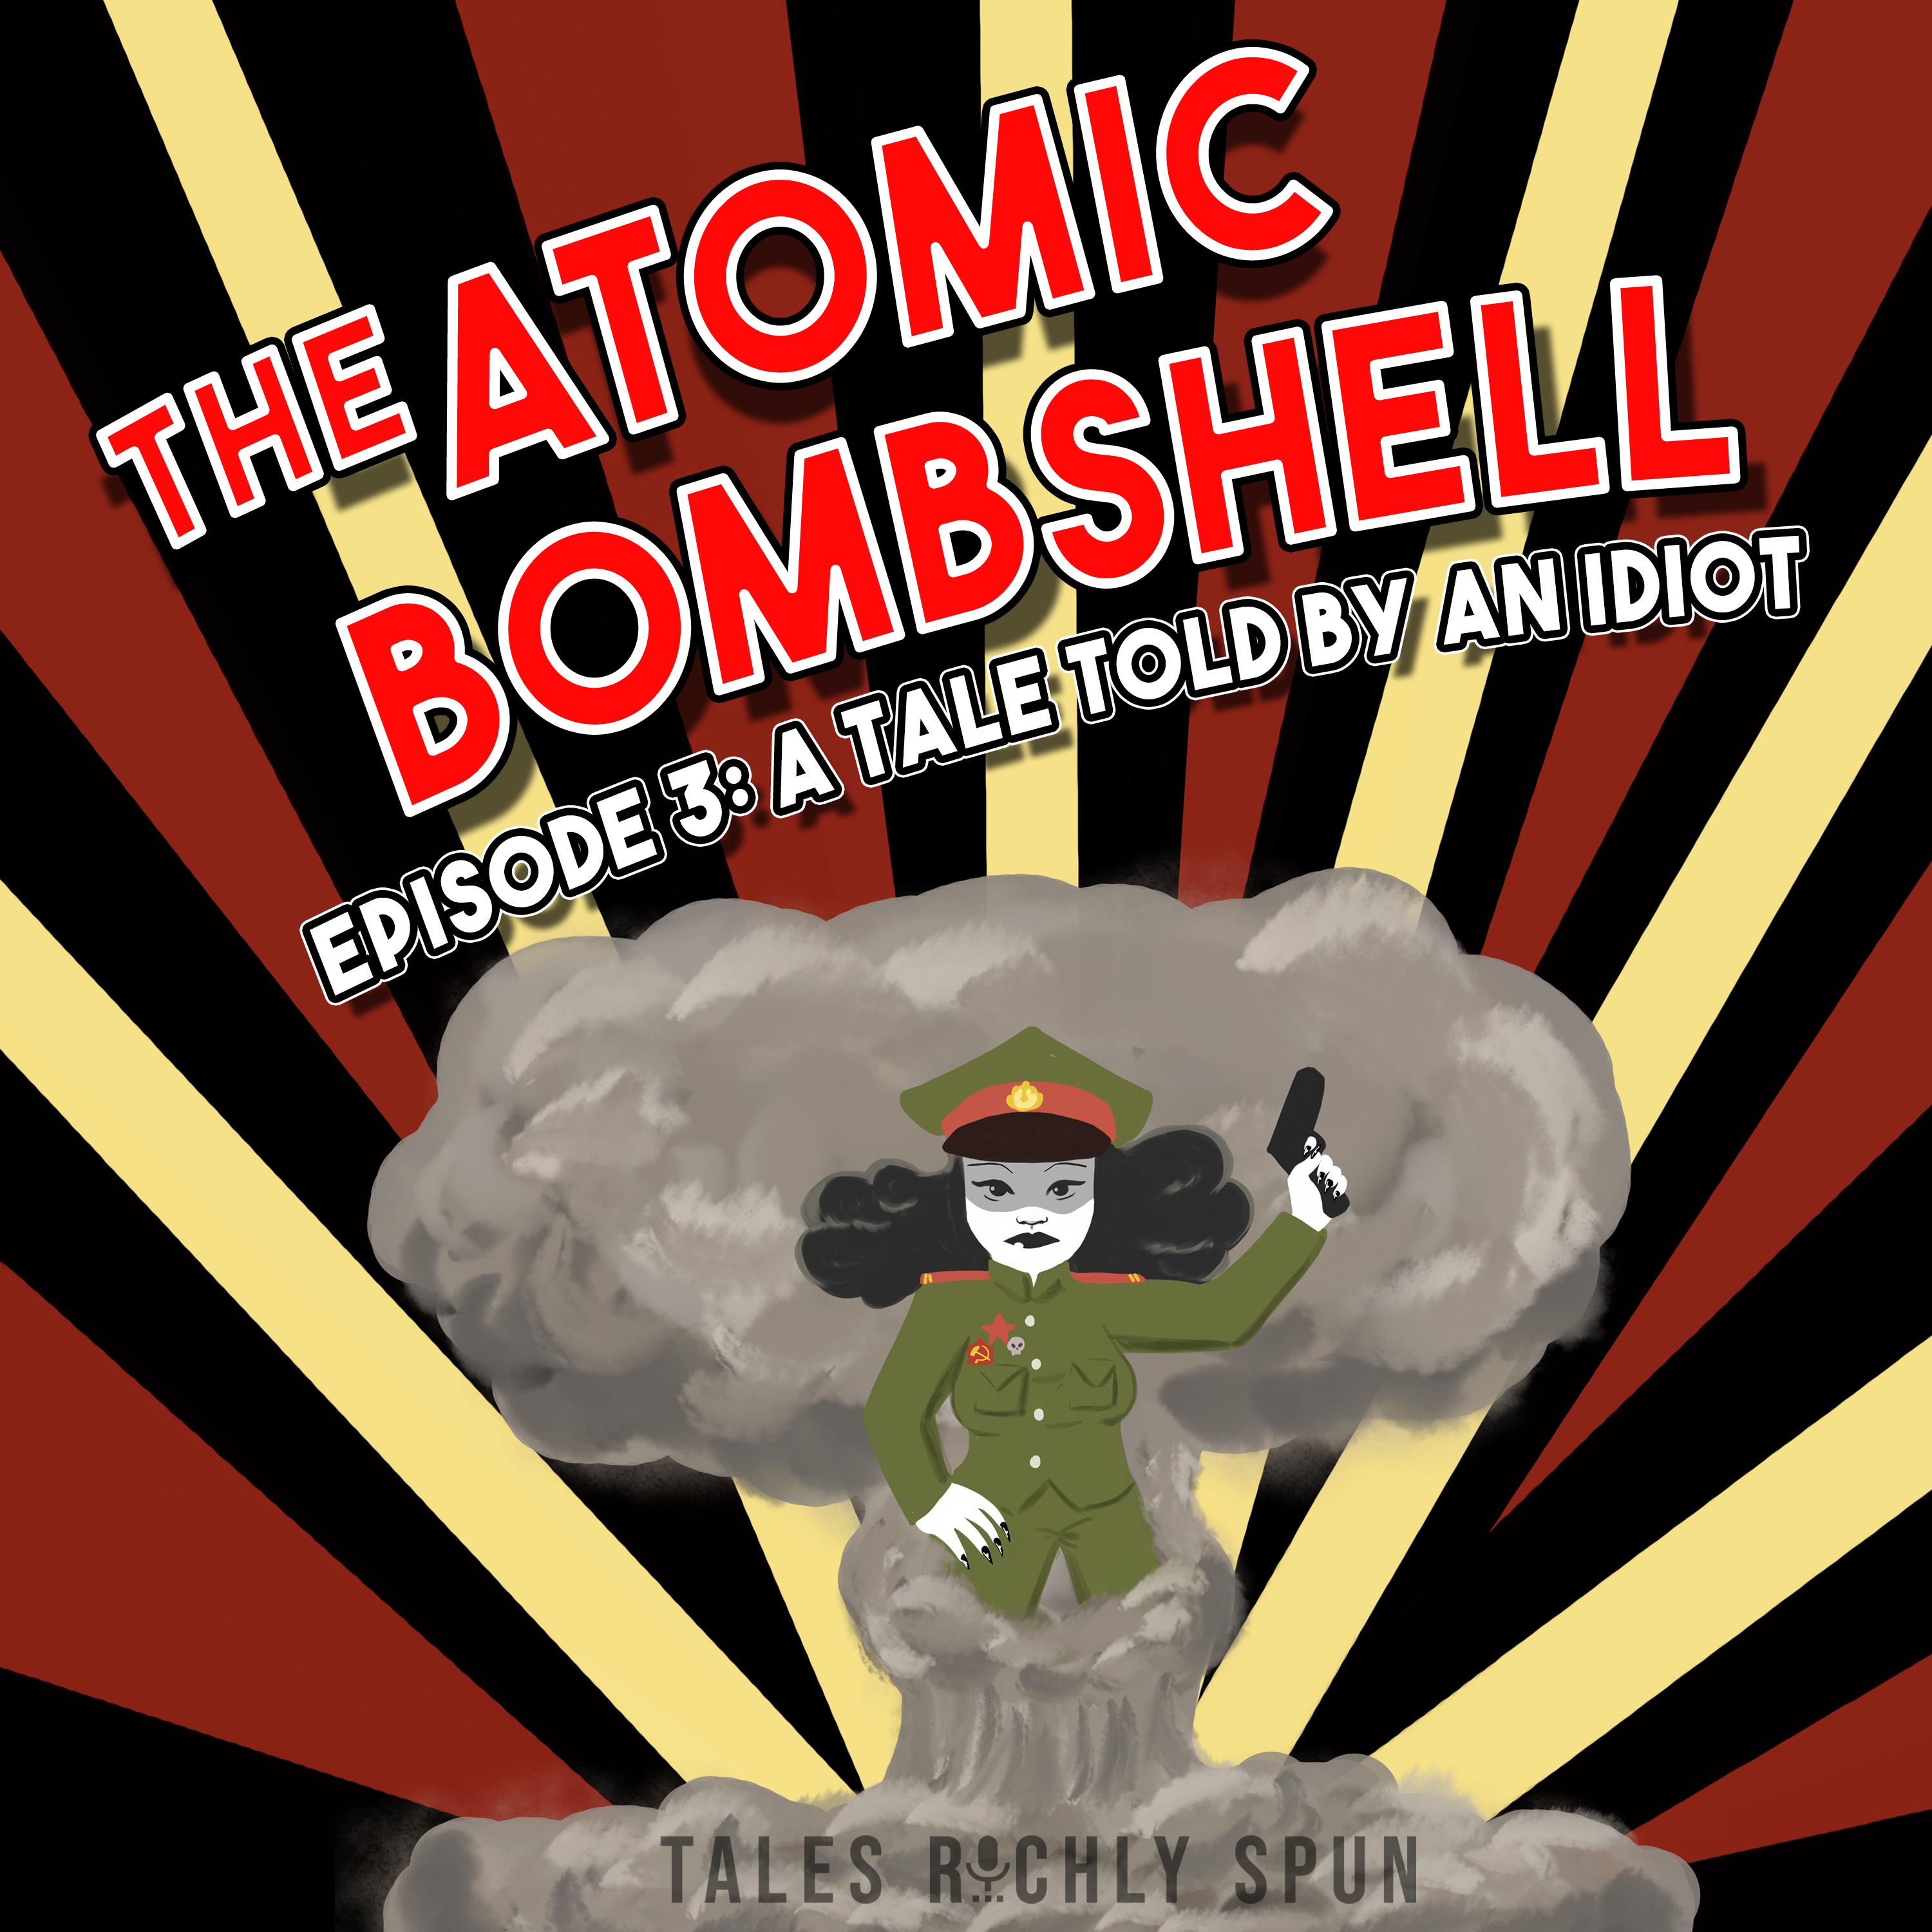 Atomic Bombshell, Episode 3: A Tale Told By An Idiot